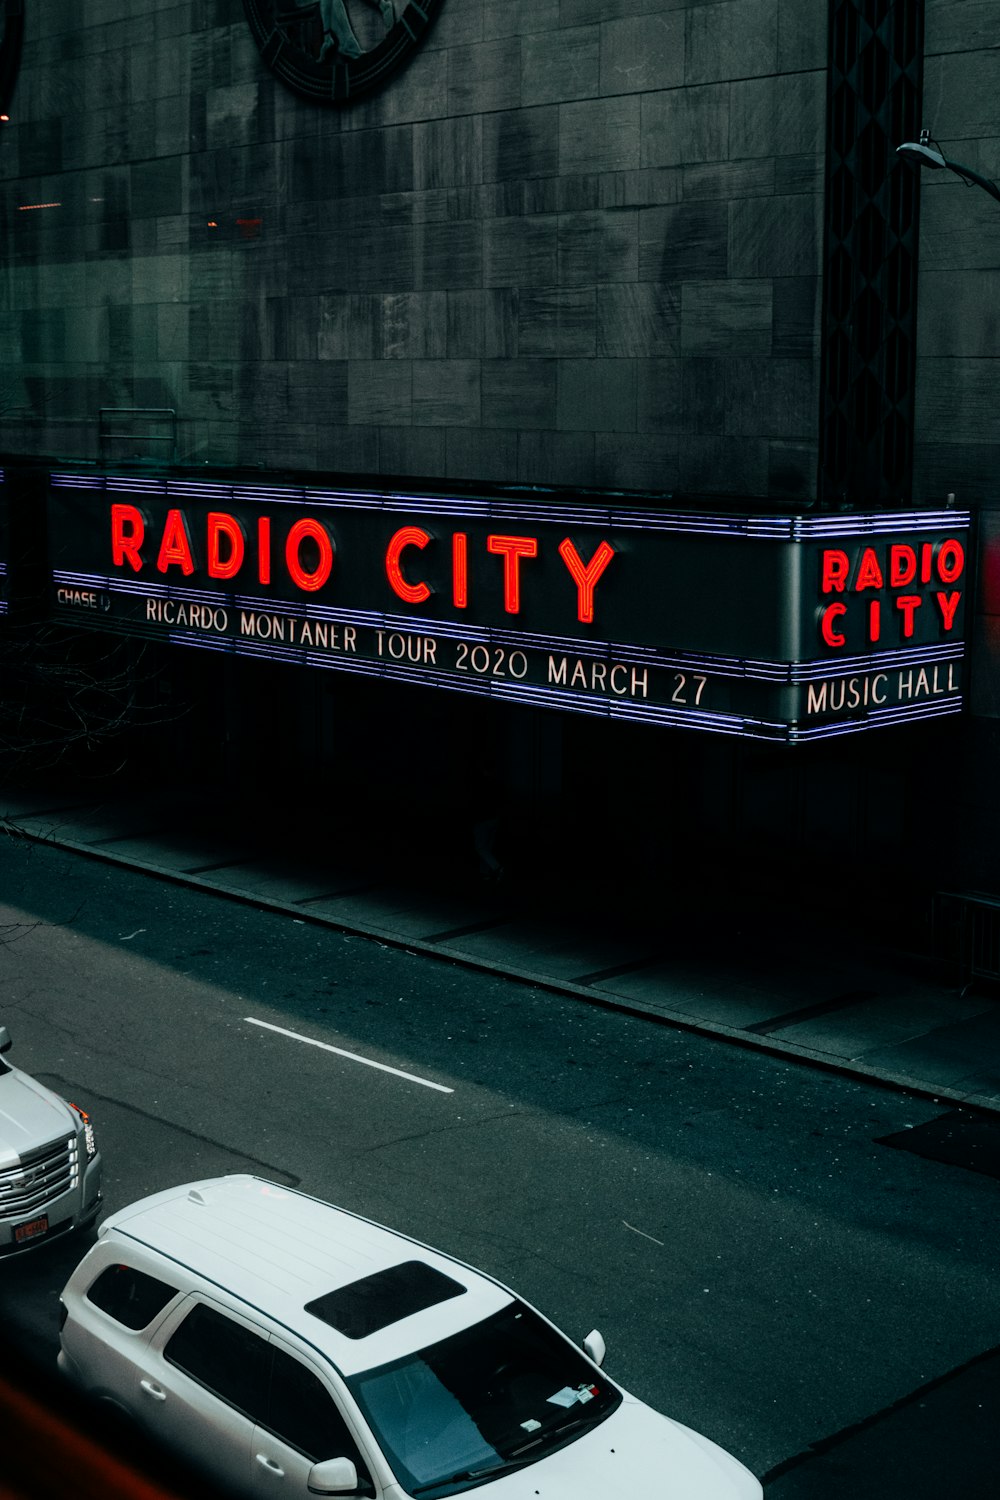 a radio city sign on the side of a building